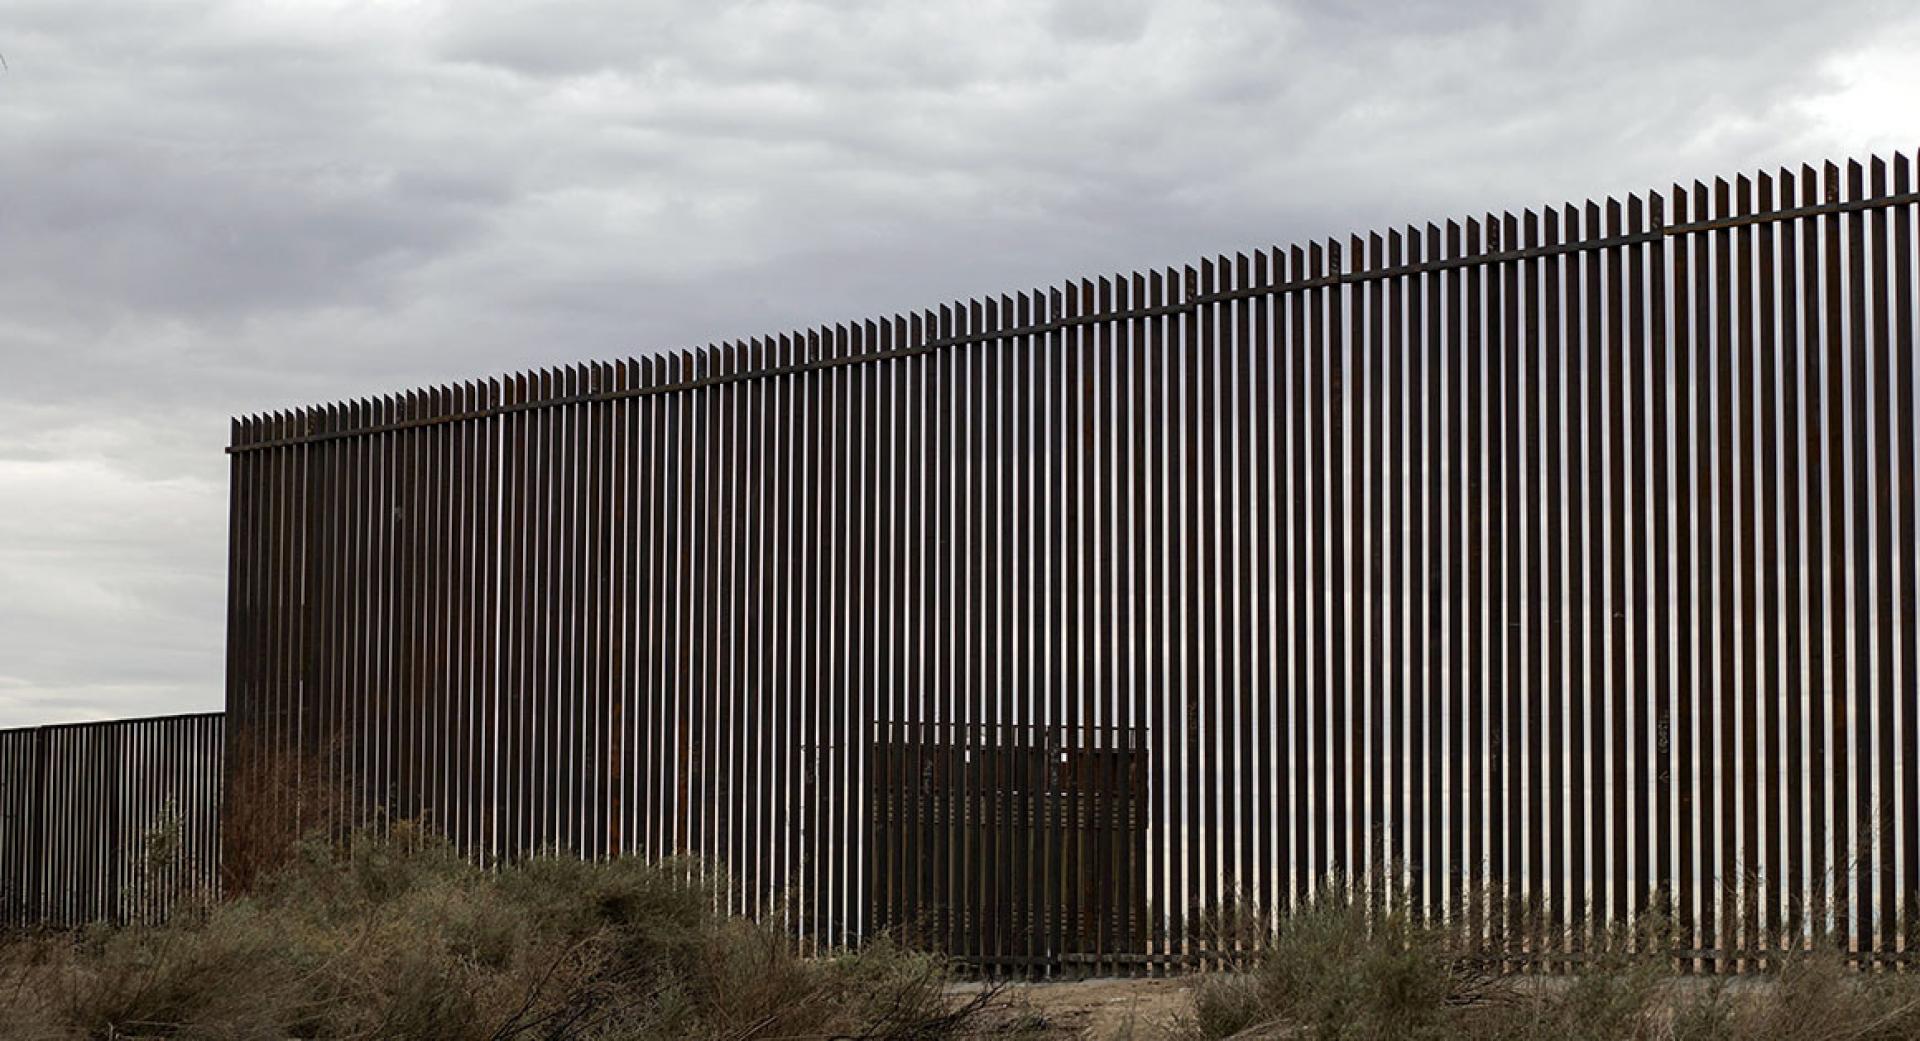 A section of the border fence between Mexico and the U.S. in Mexicali, Baja California. | Photo © Guillermo Arias